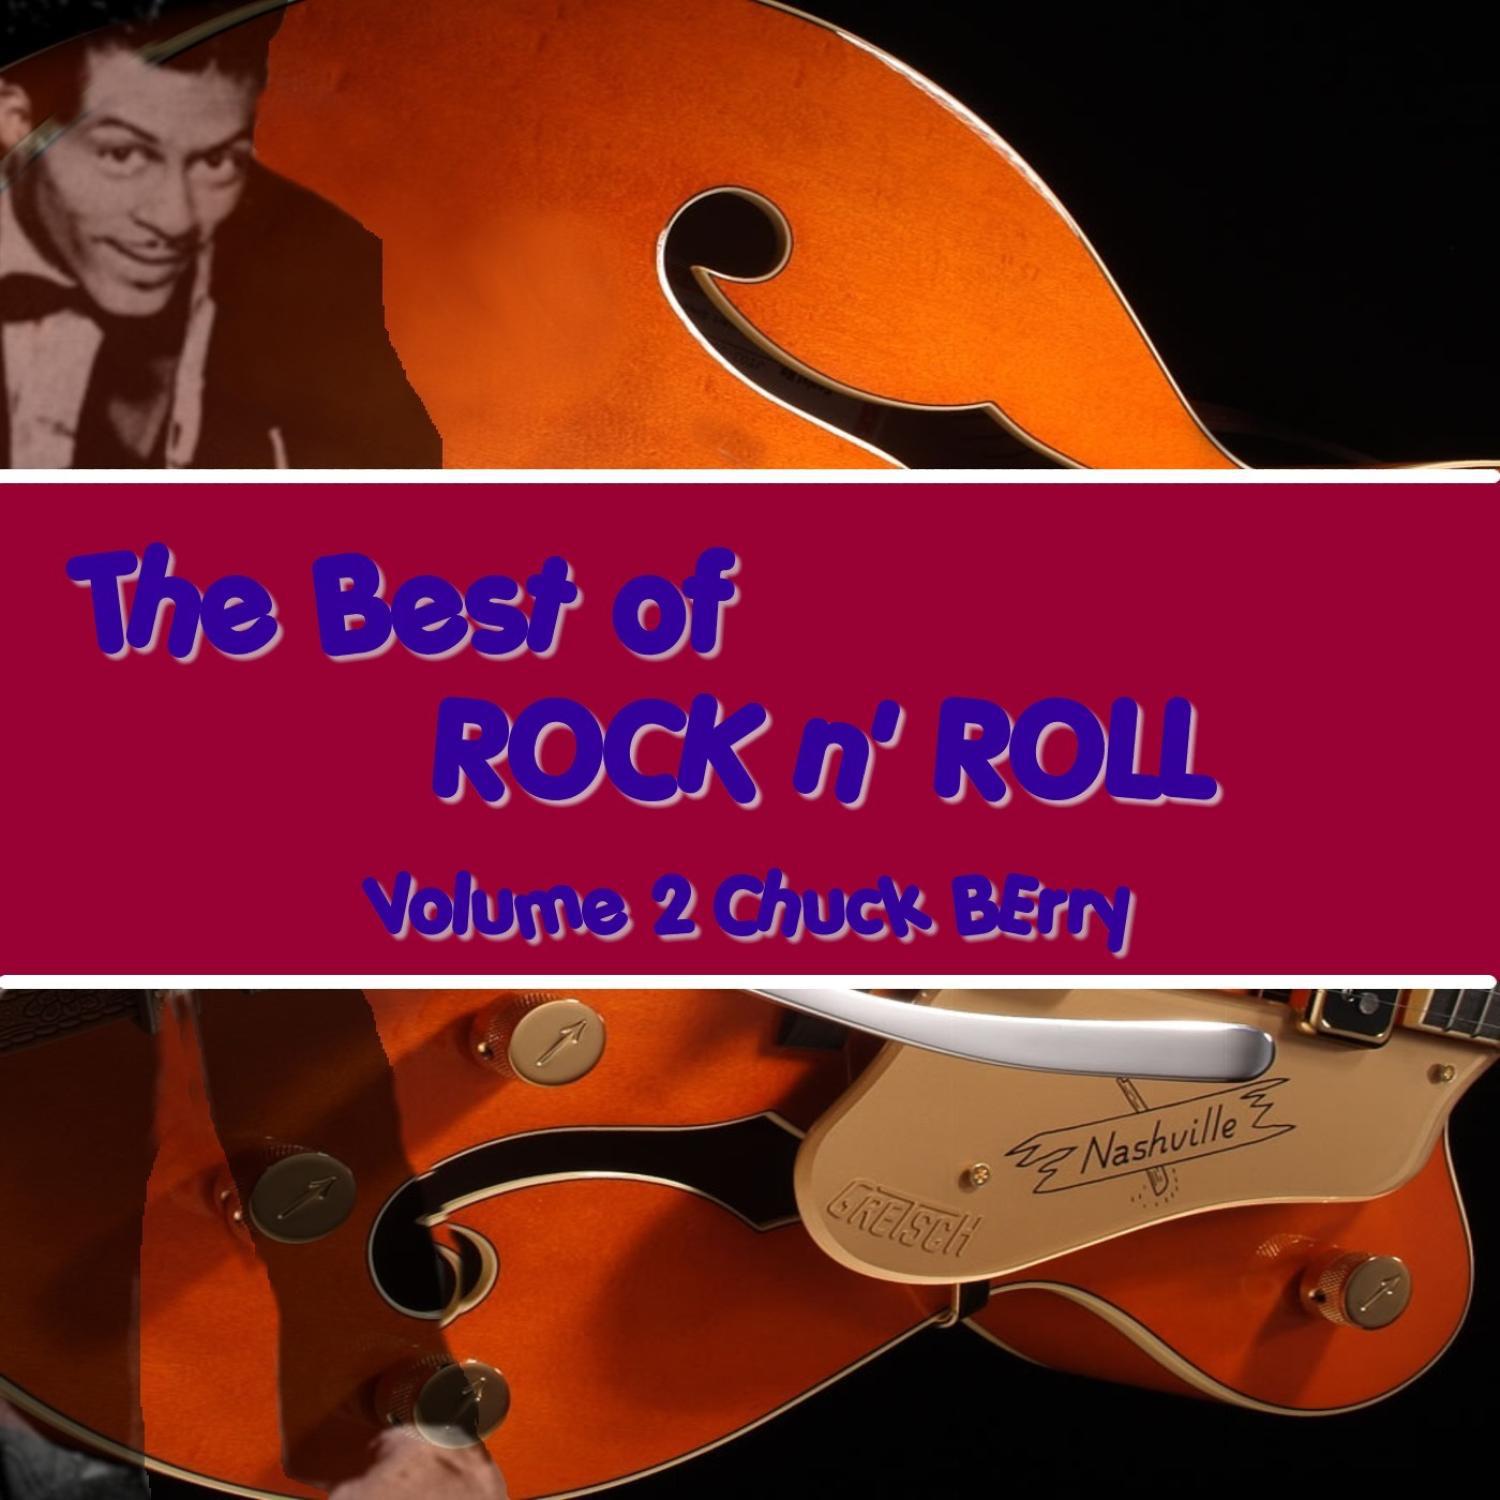 The Best of Rock & Roll, Vol. 2: Chuck Berry